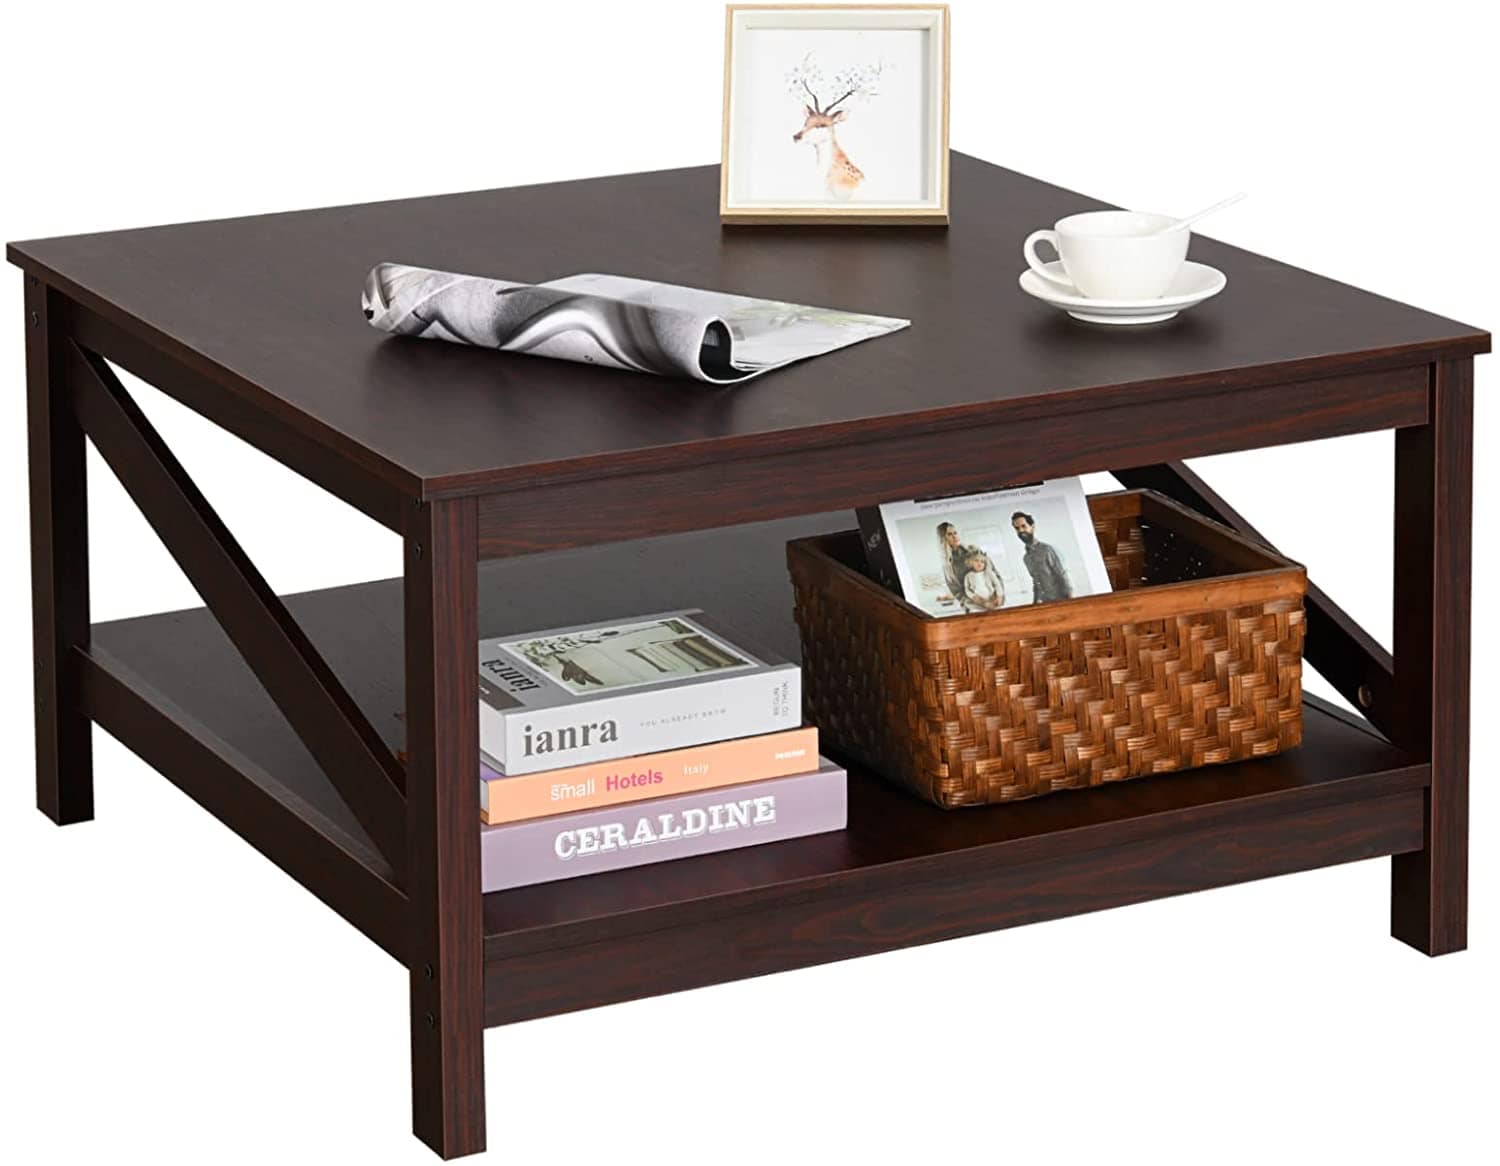 Square Two-Tier Coffee Tables with Storage,Coffee Table for Living Room, Center Table Coffee Table for Home ,Wood Living Room Table